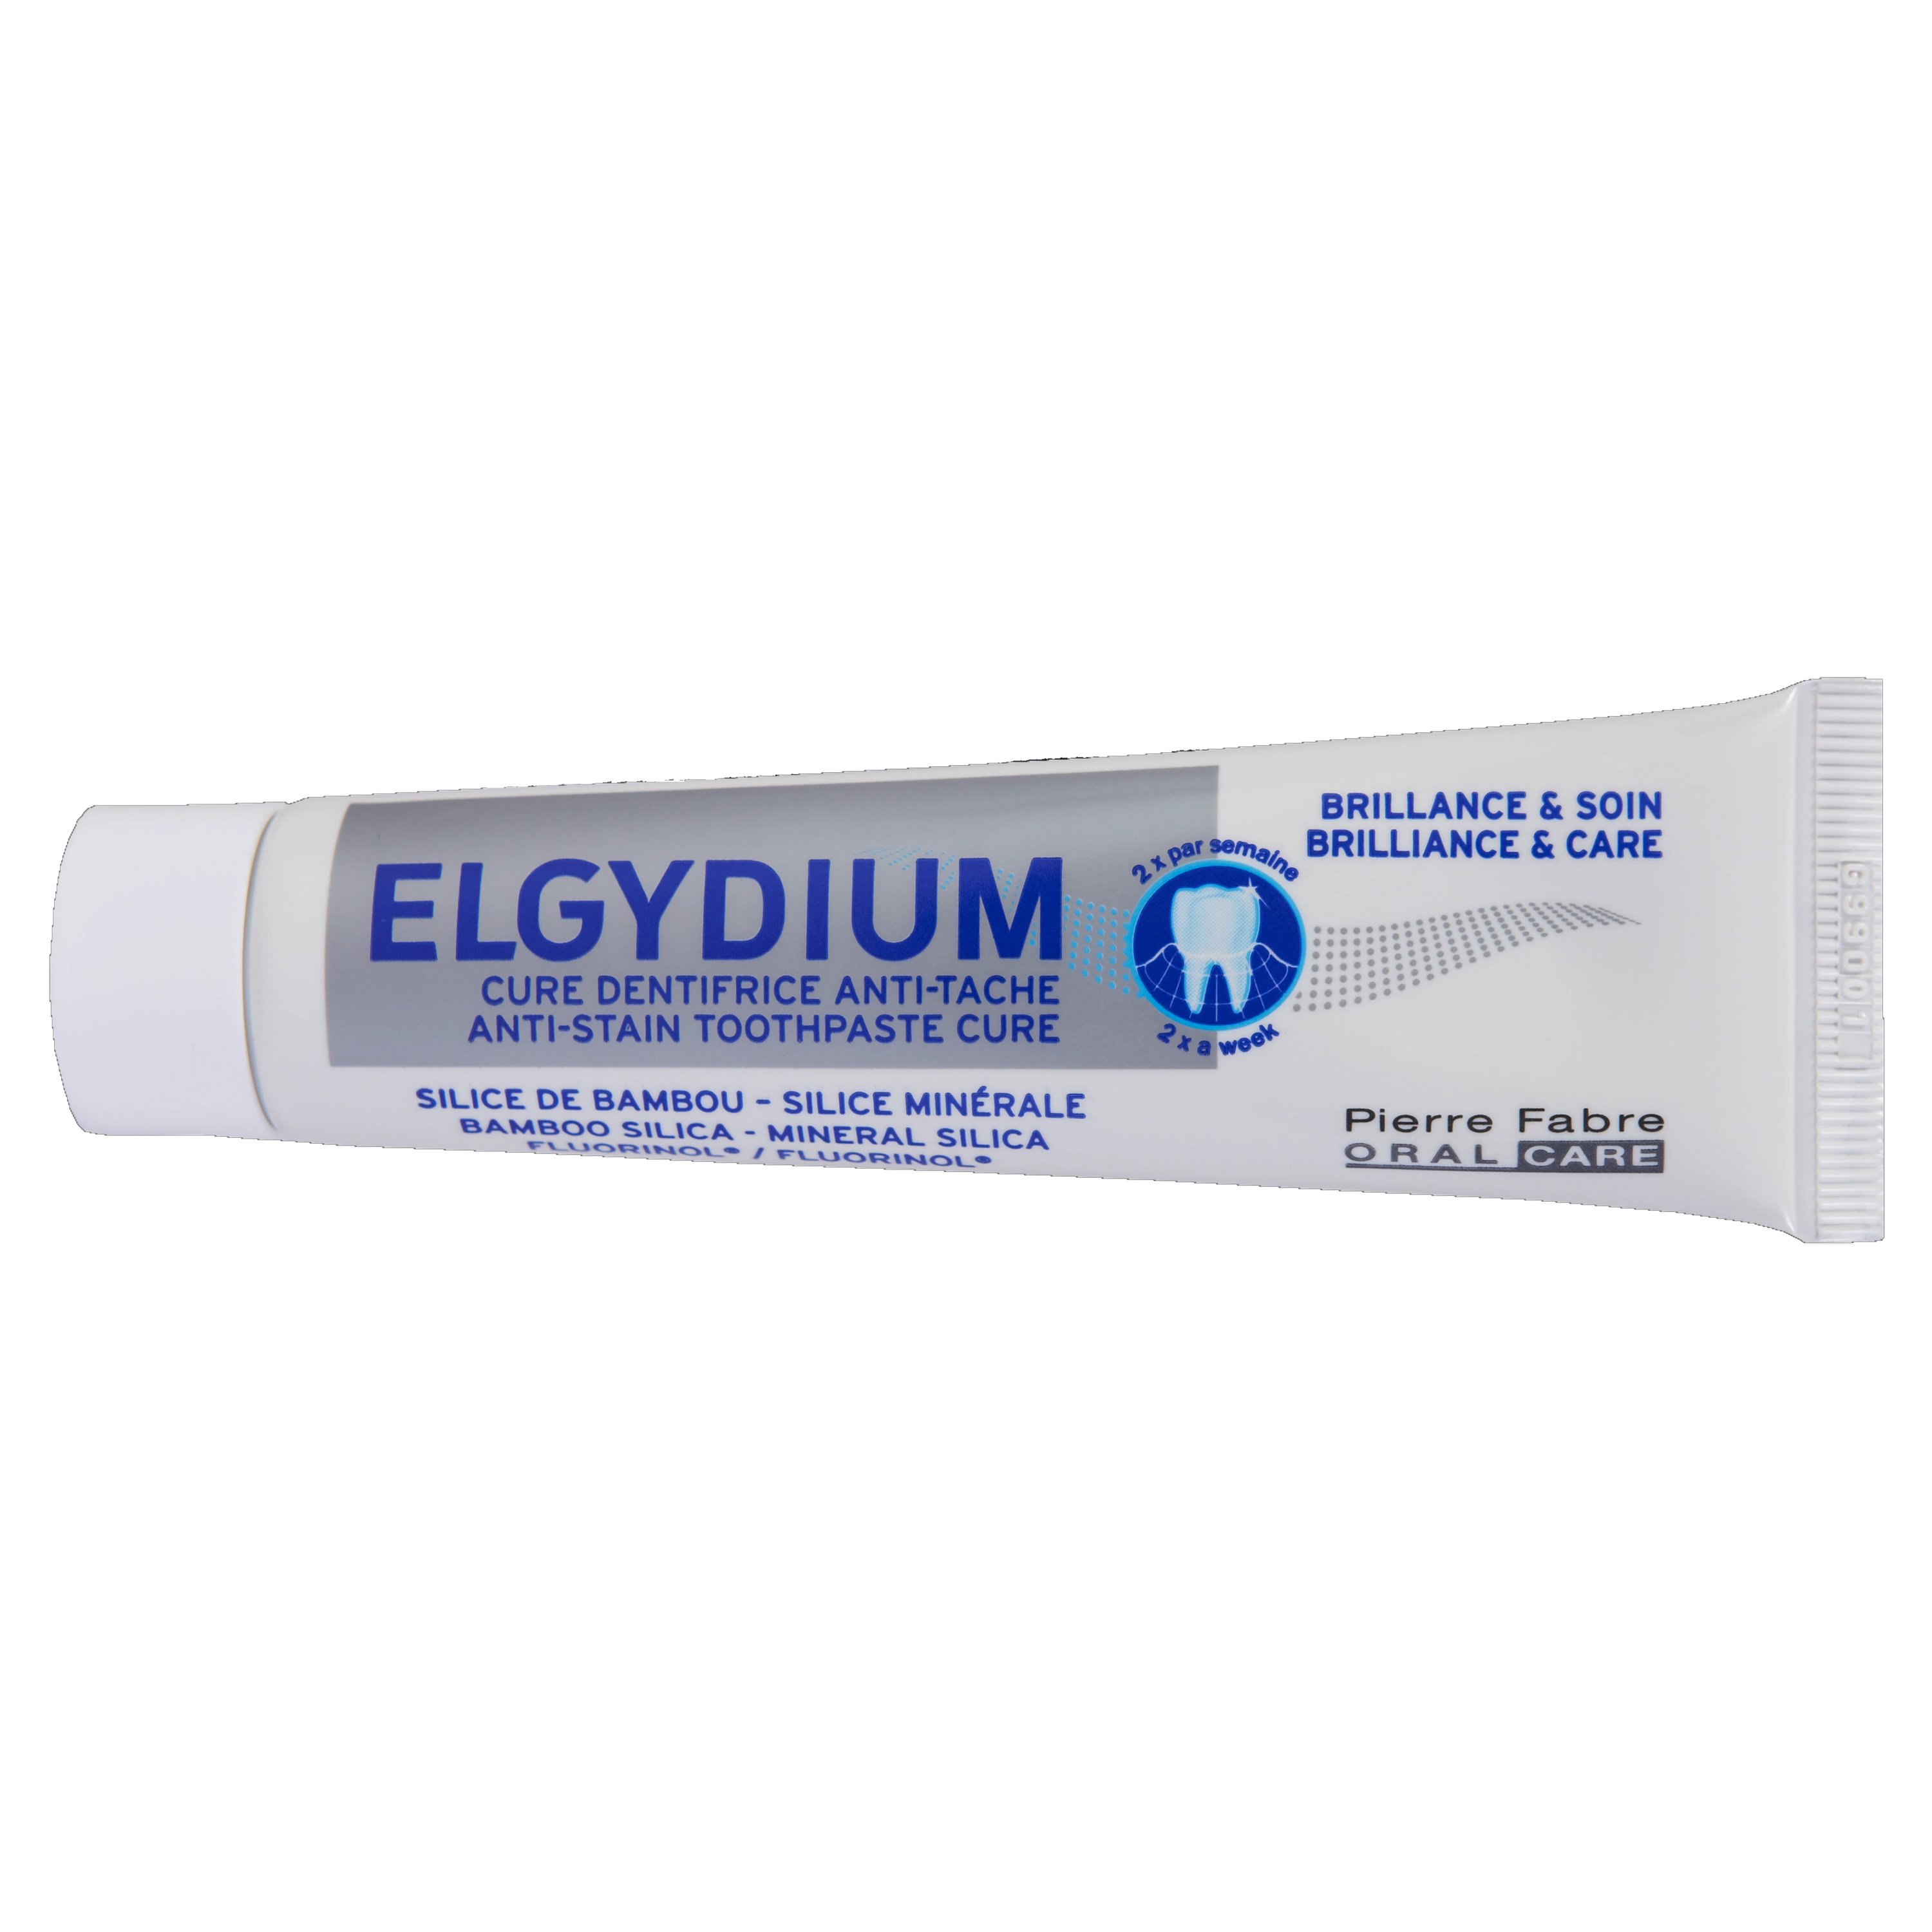 Pierre Fabre Oral Care Elgydium Brilliance & Care Toothpaste Λευκαντική Οδοντόπαστα Κατά των Λεκέδων στα Δόντια 30ml